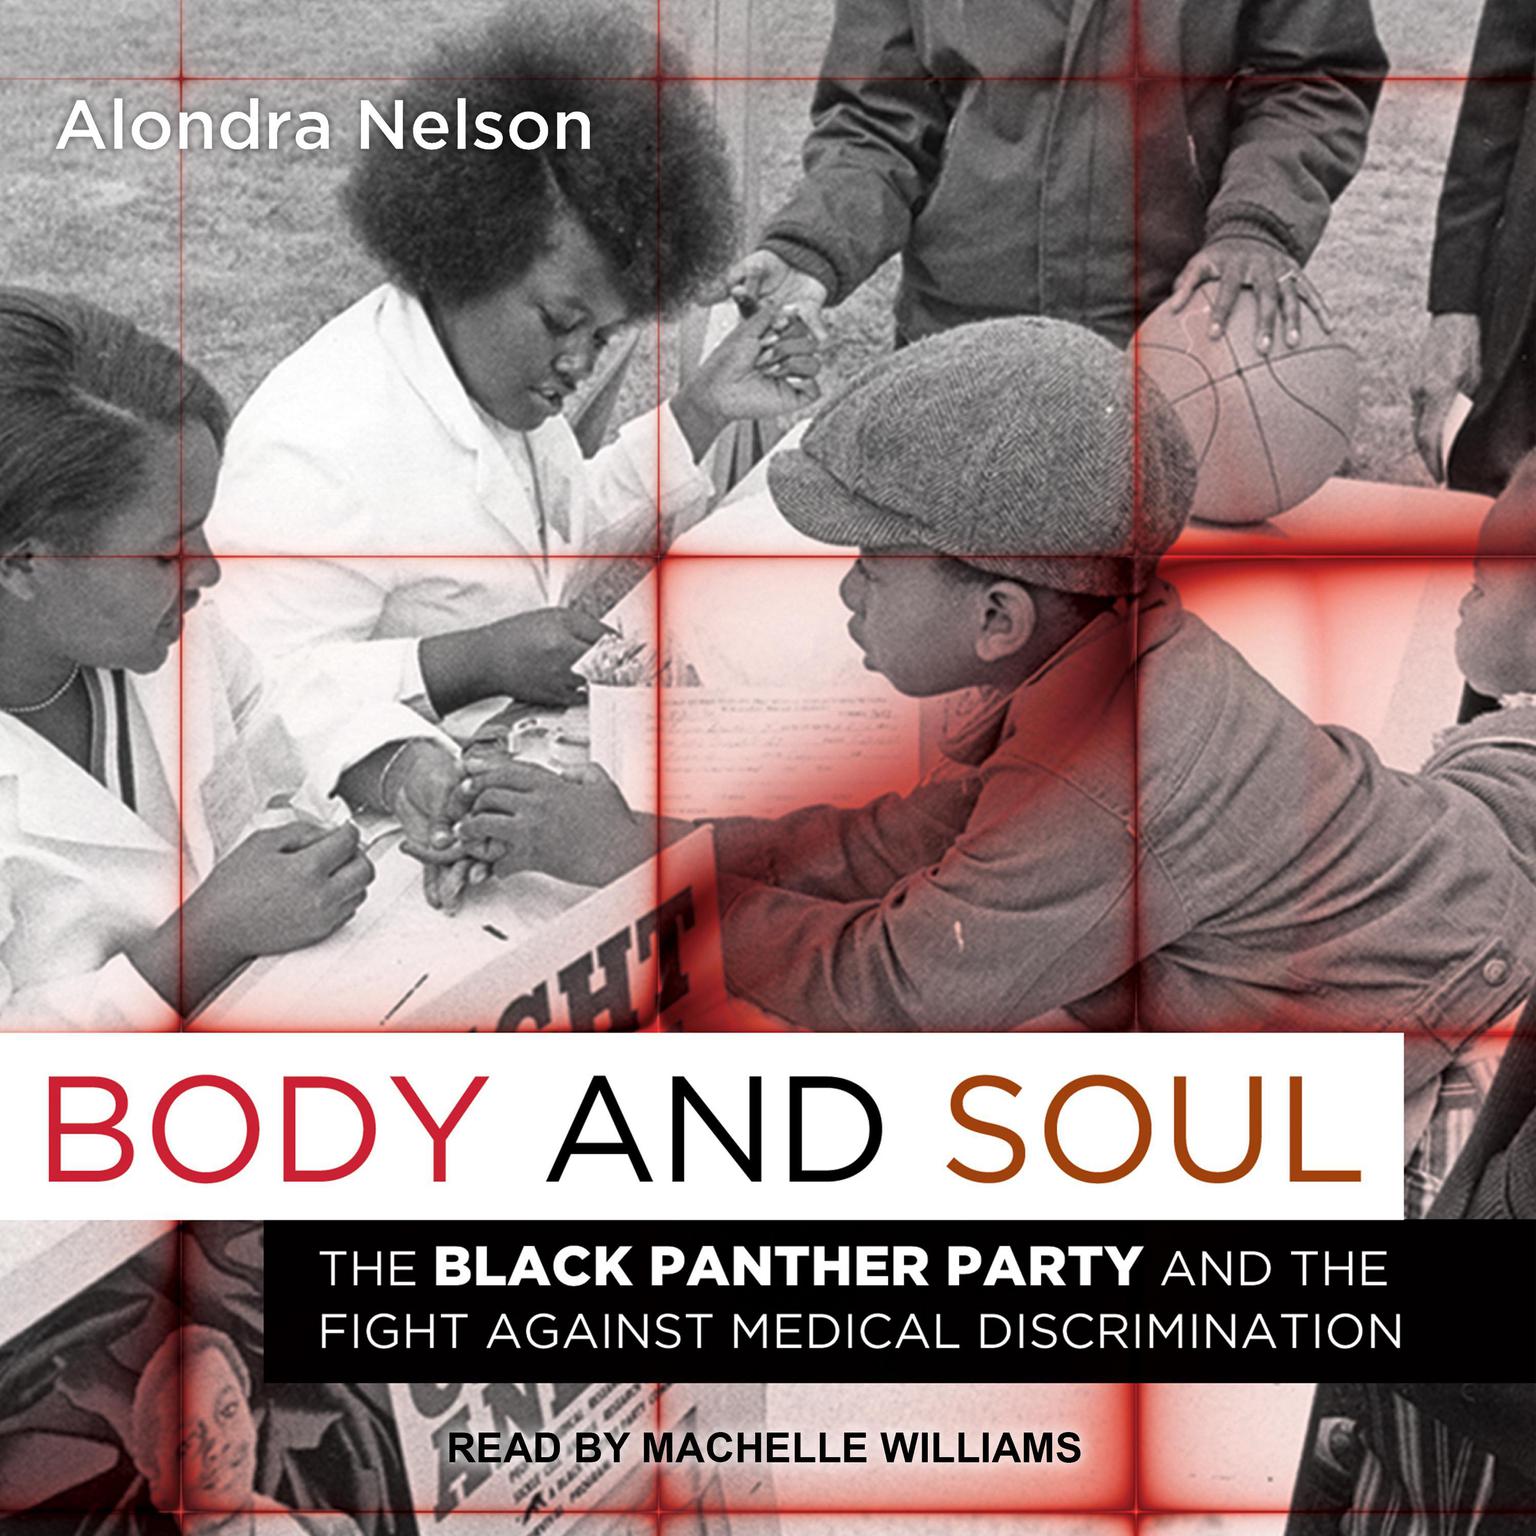 Body and Soul: The Black Panther Party and the Fight Against Medical Discrimination Audiobook, by Alondra Nelson